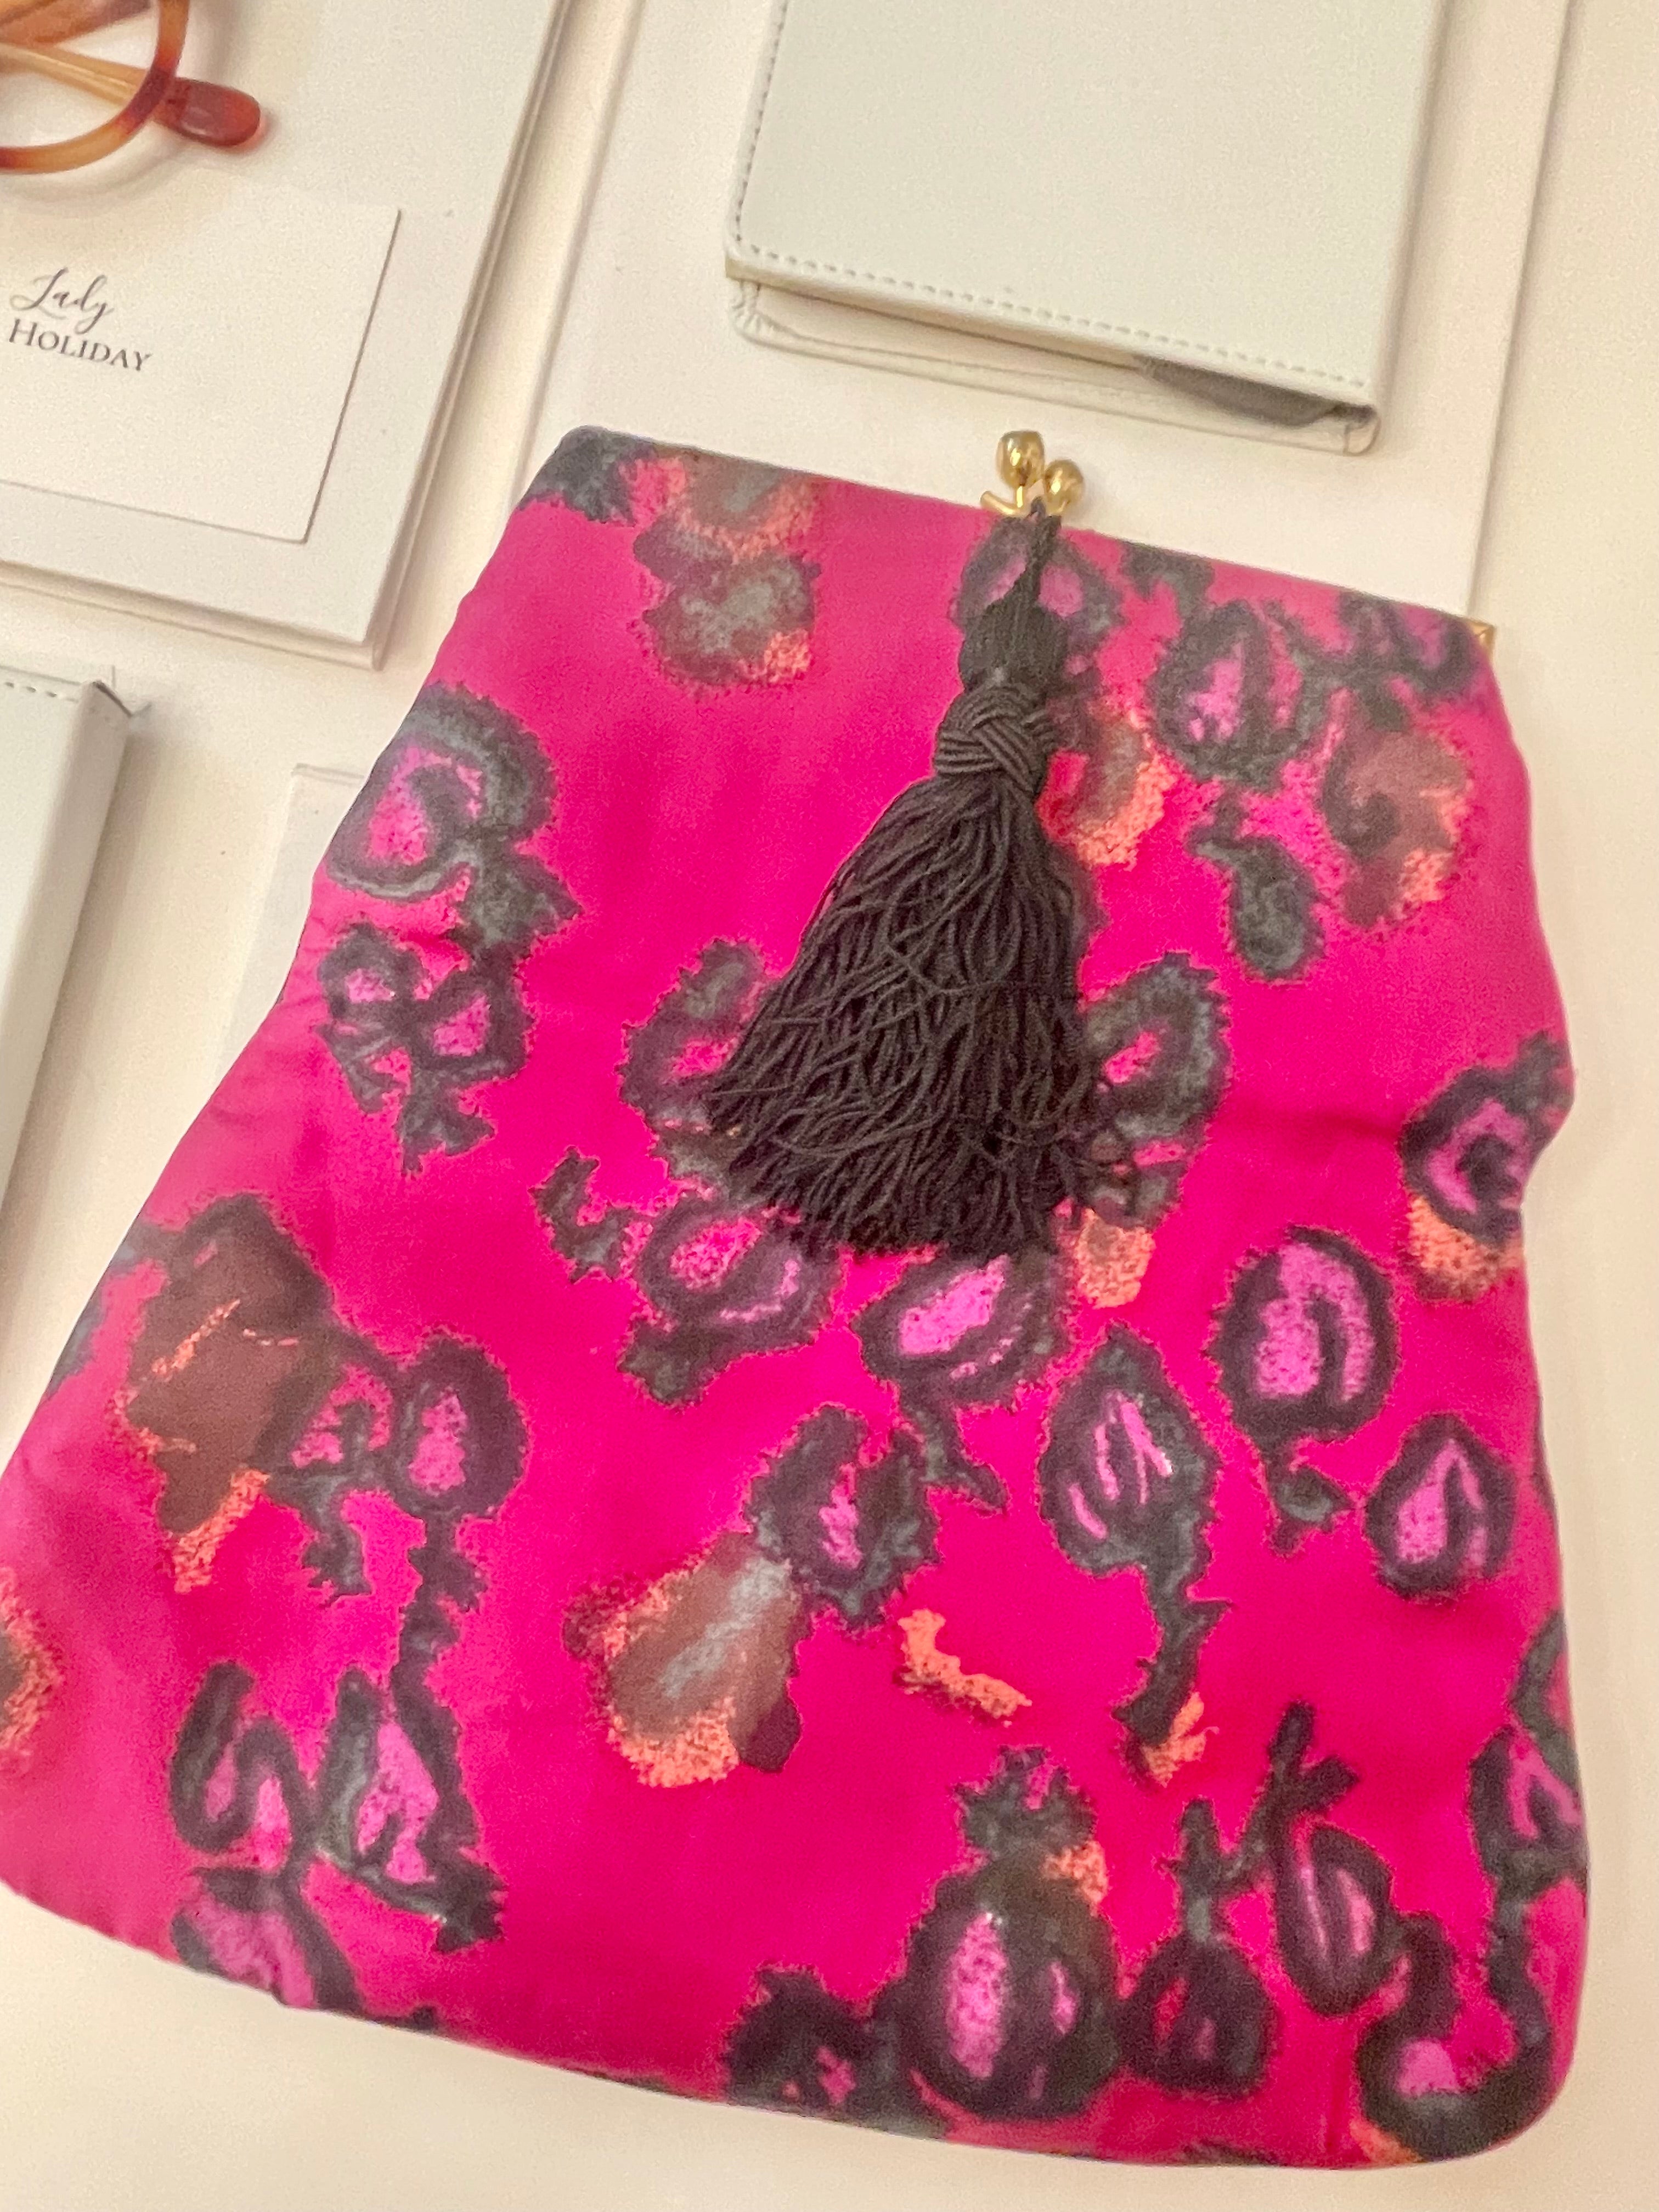 Flirty Gal loves anything pink! this 1960's hot pink floral clutch bag, makes her heart happy!